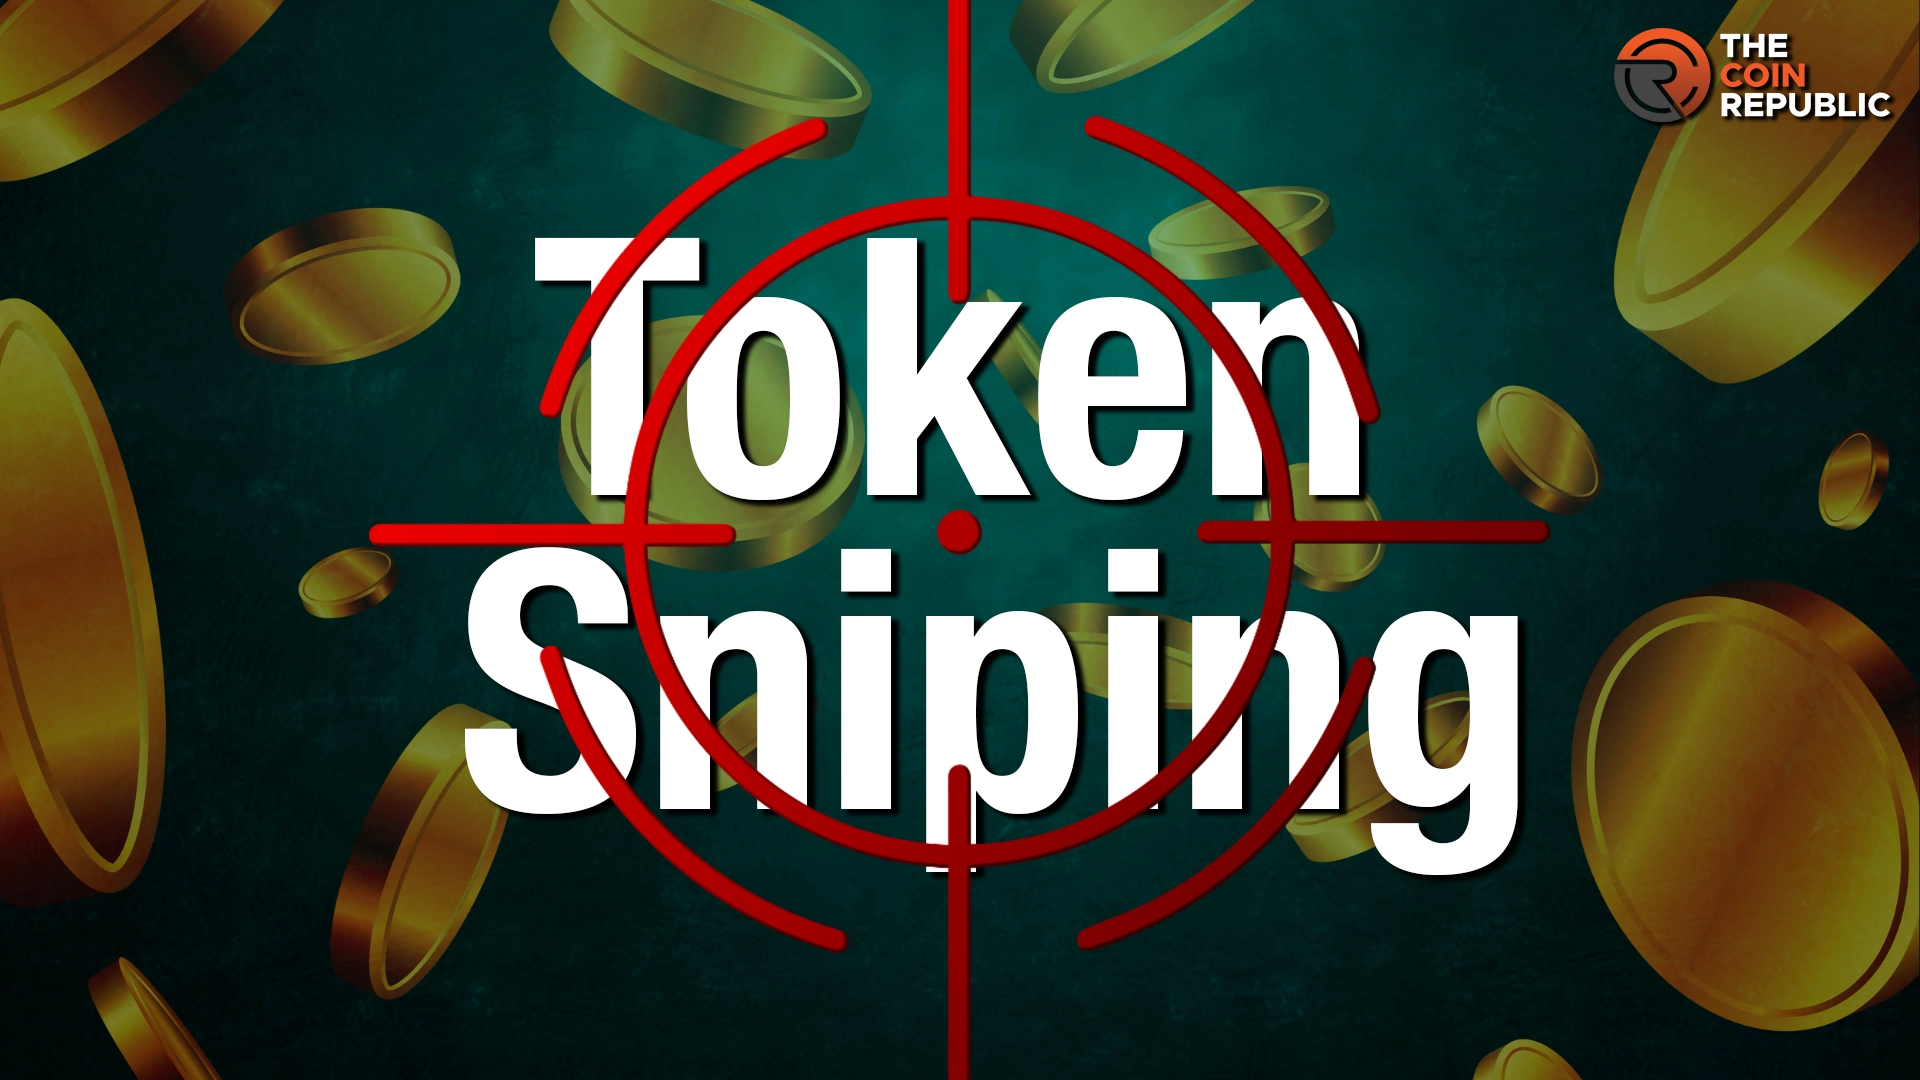 What Is Token Sniping And How To Stop Token Sniping